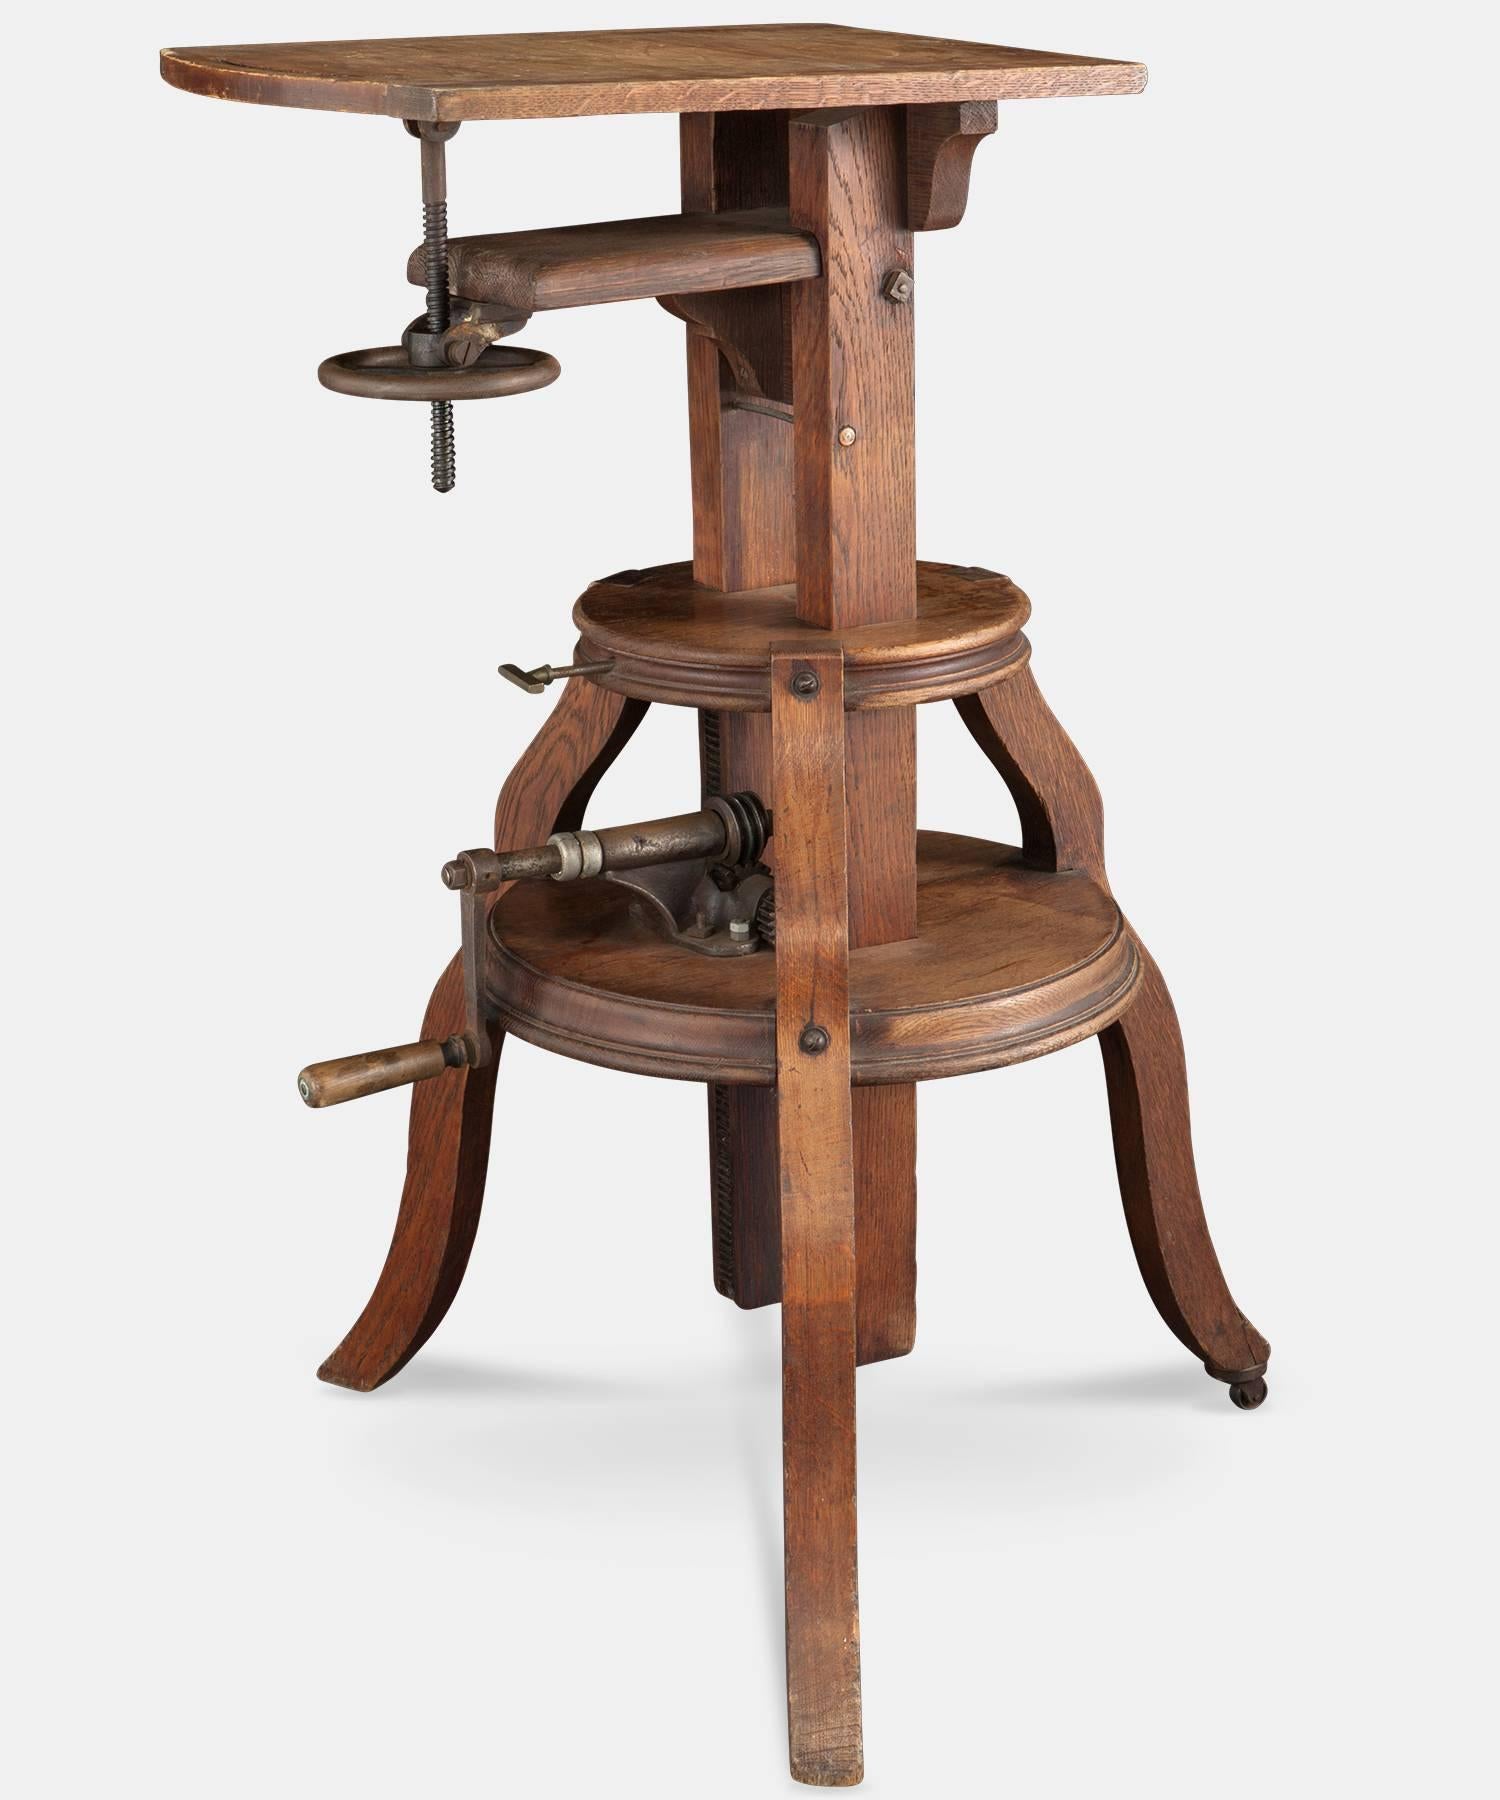 Wooden frame with swivel top. Original hardware allows for adjustable height,

France, circa 1880.